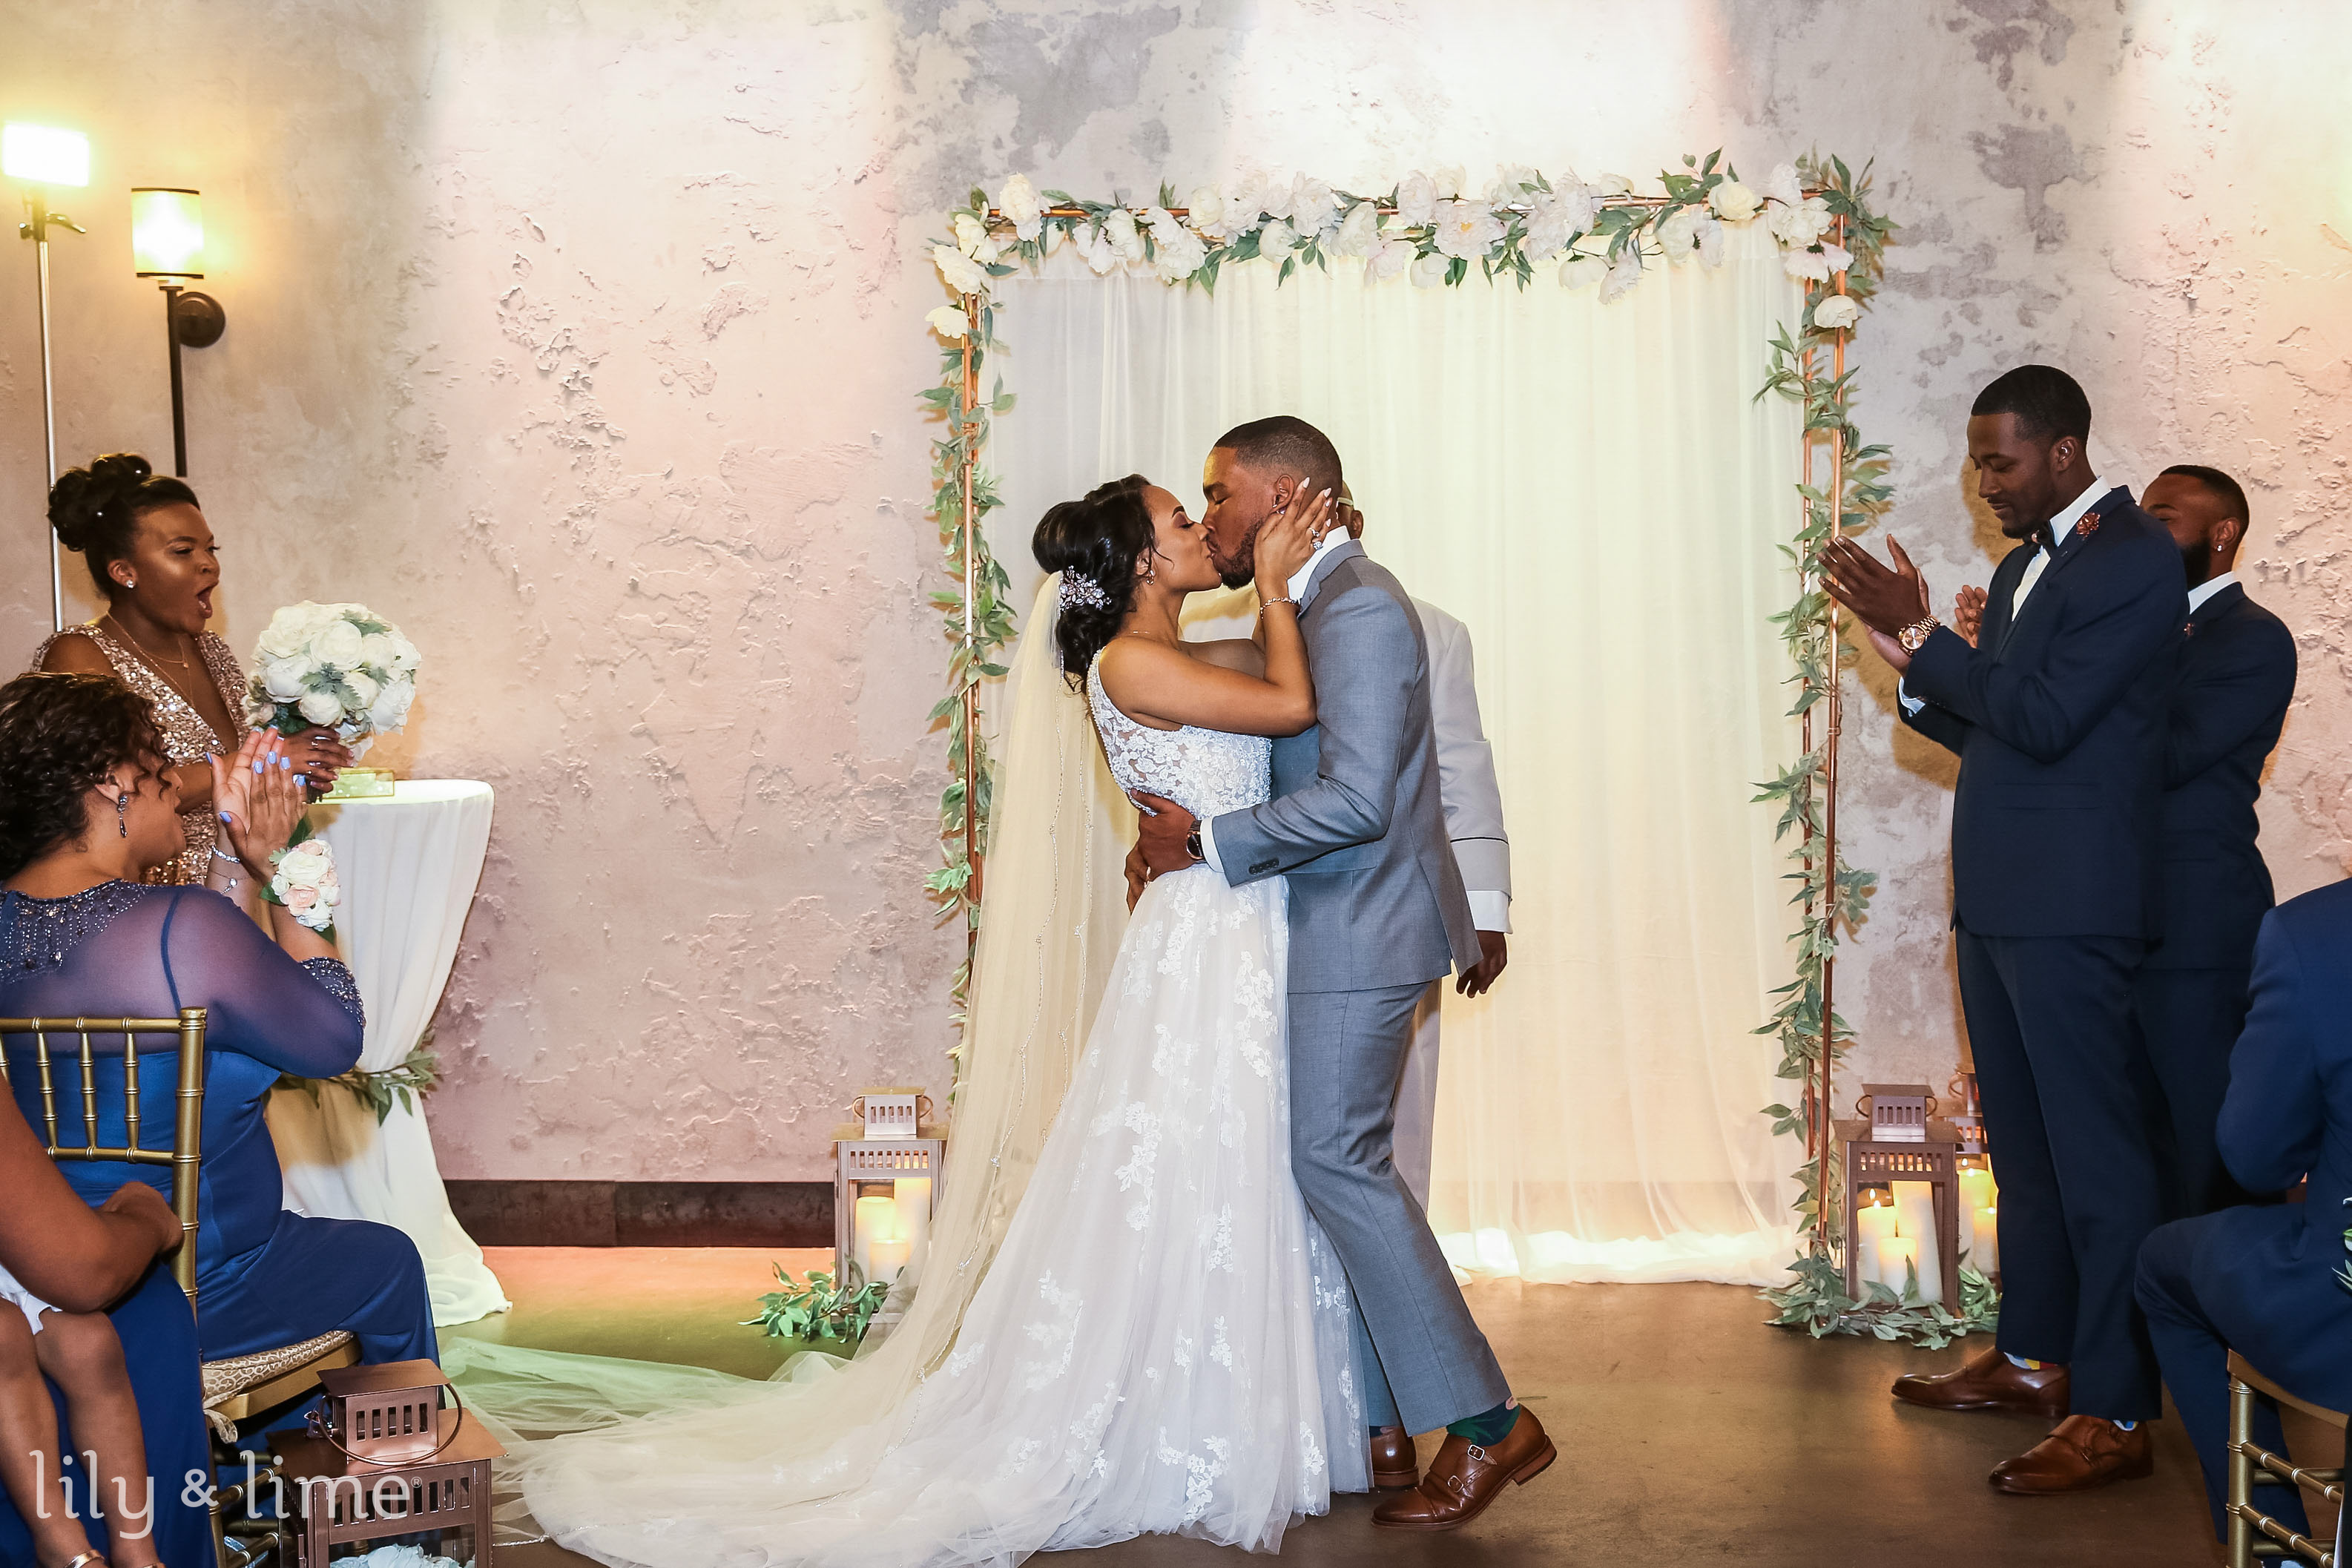 Black American Wedding Traditions To Incorporate Into Your Special